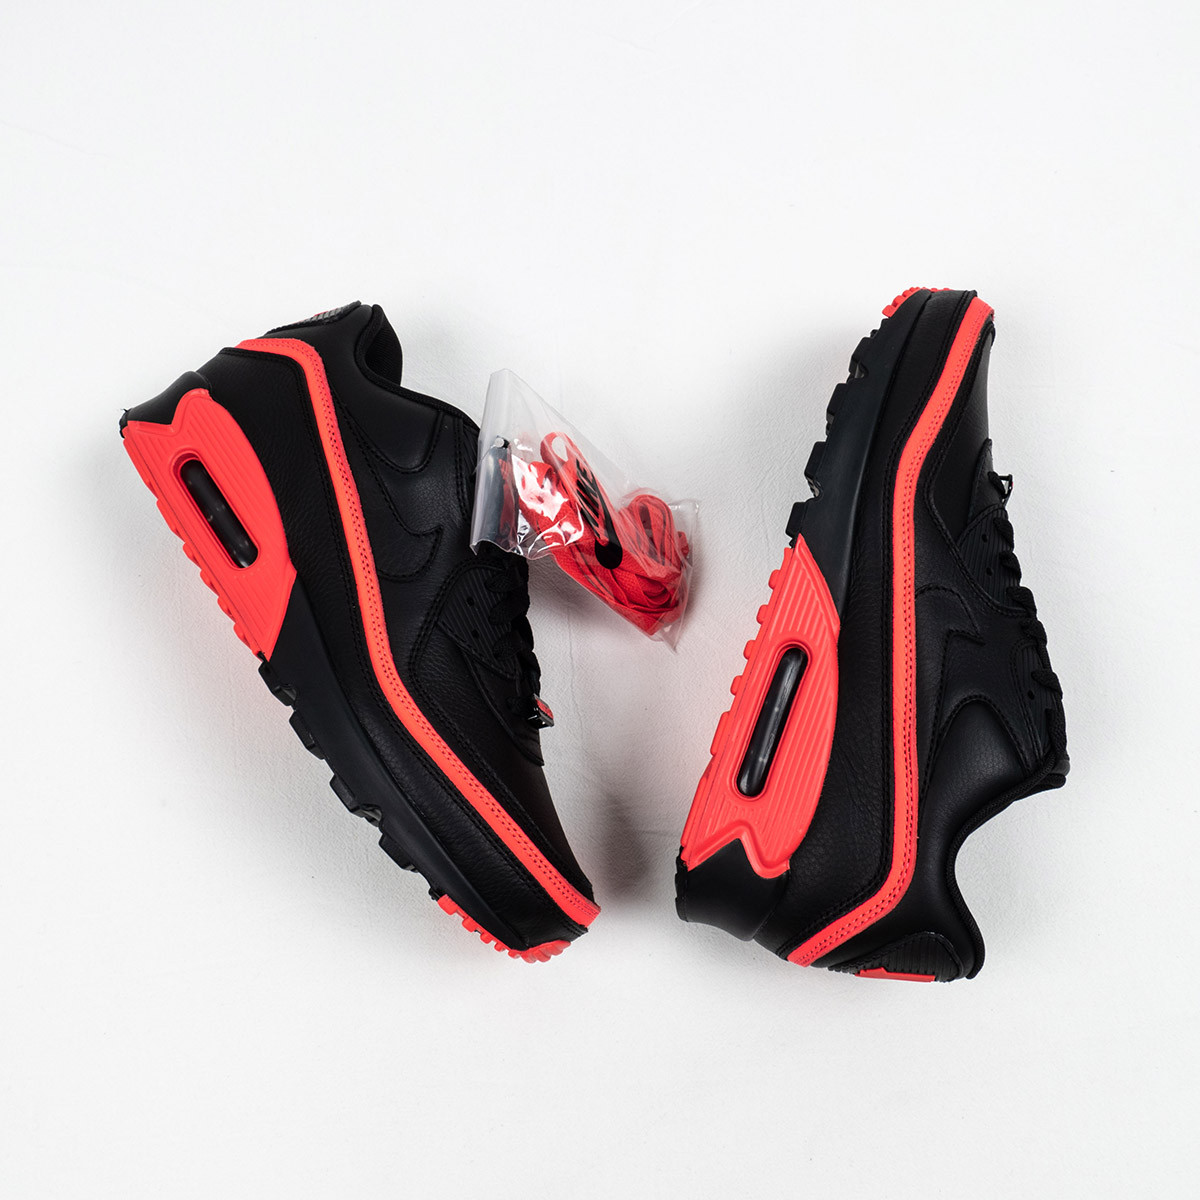 Undefeated x Nike Air Max 90 Black Solar Red For Sale